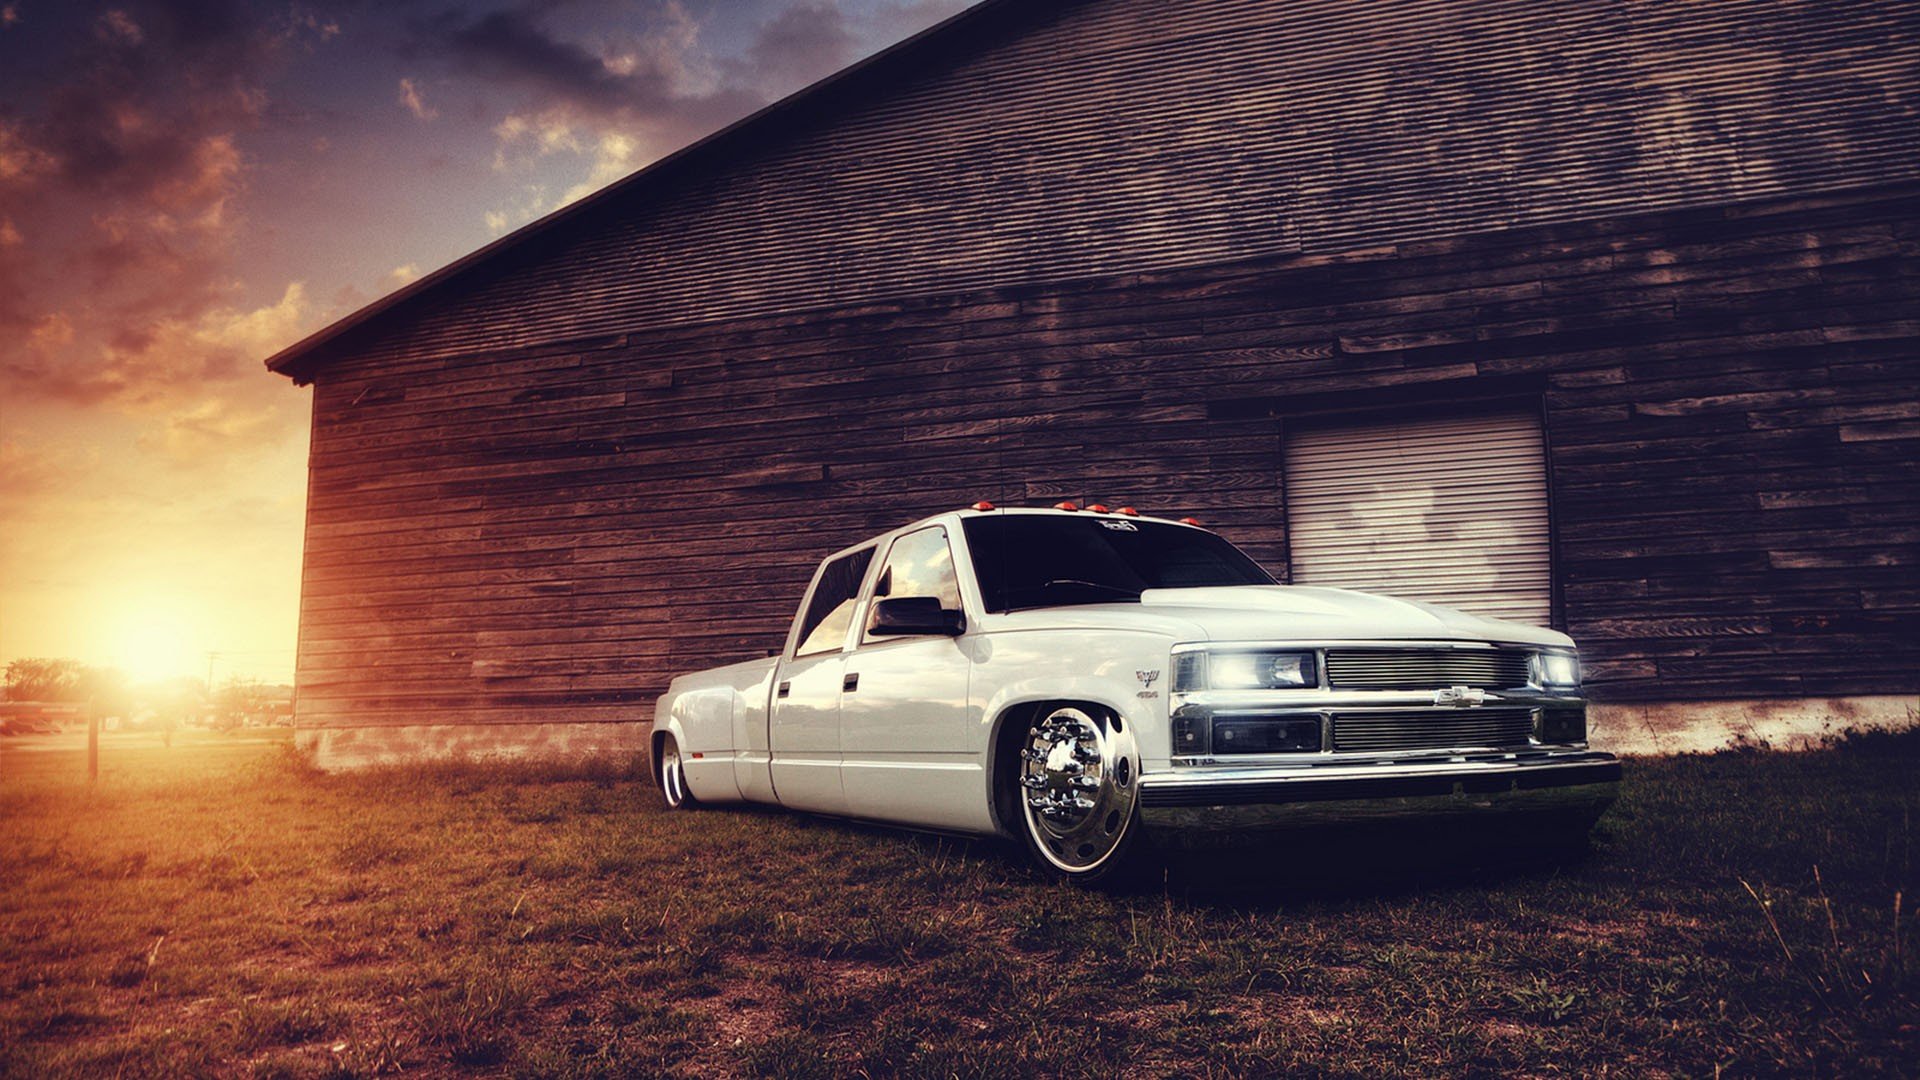 28 Latest Chevy Truck Backgrounds TXI81 4K Ultra HD Wallpapers 1920x1080